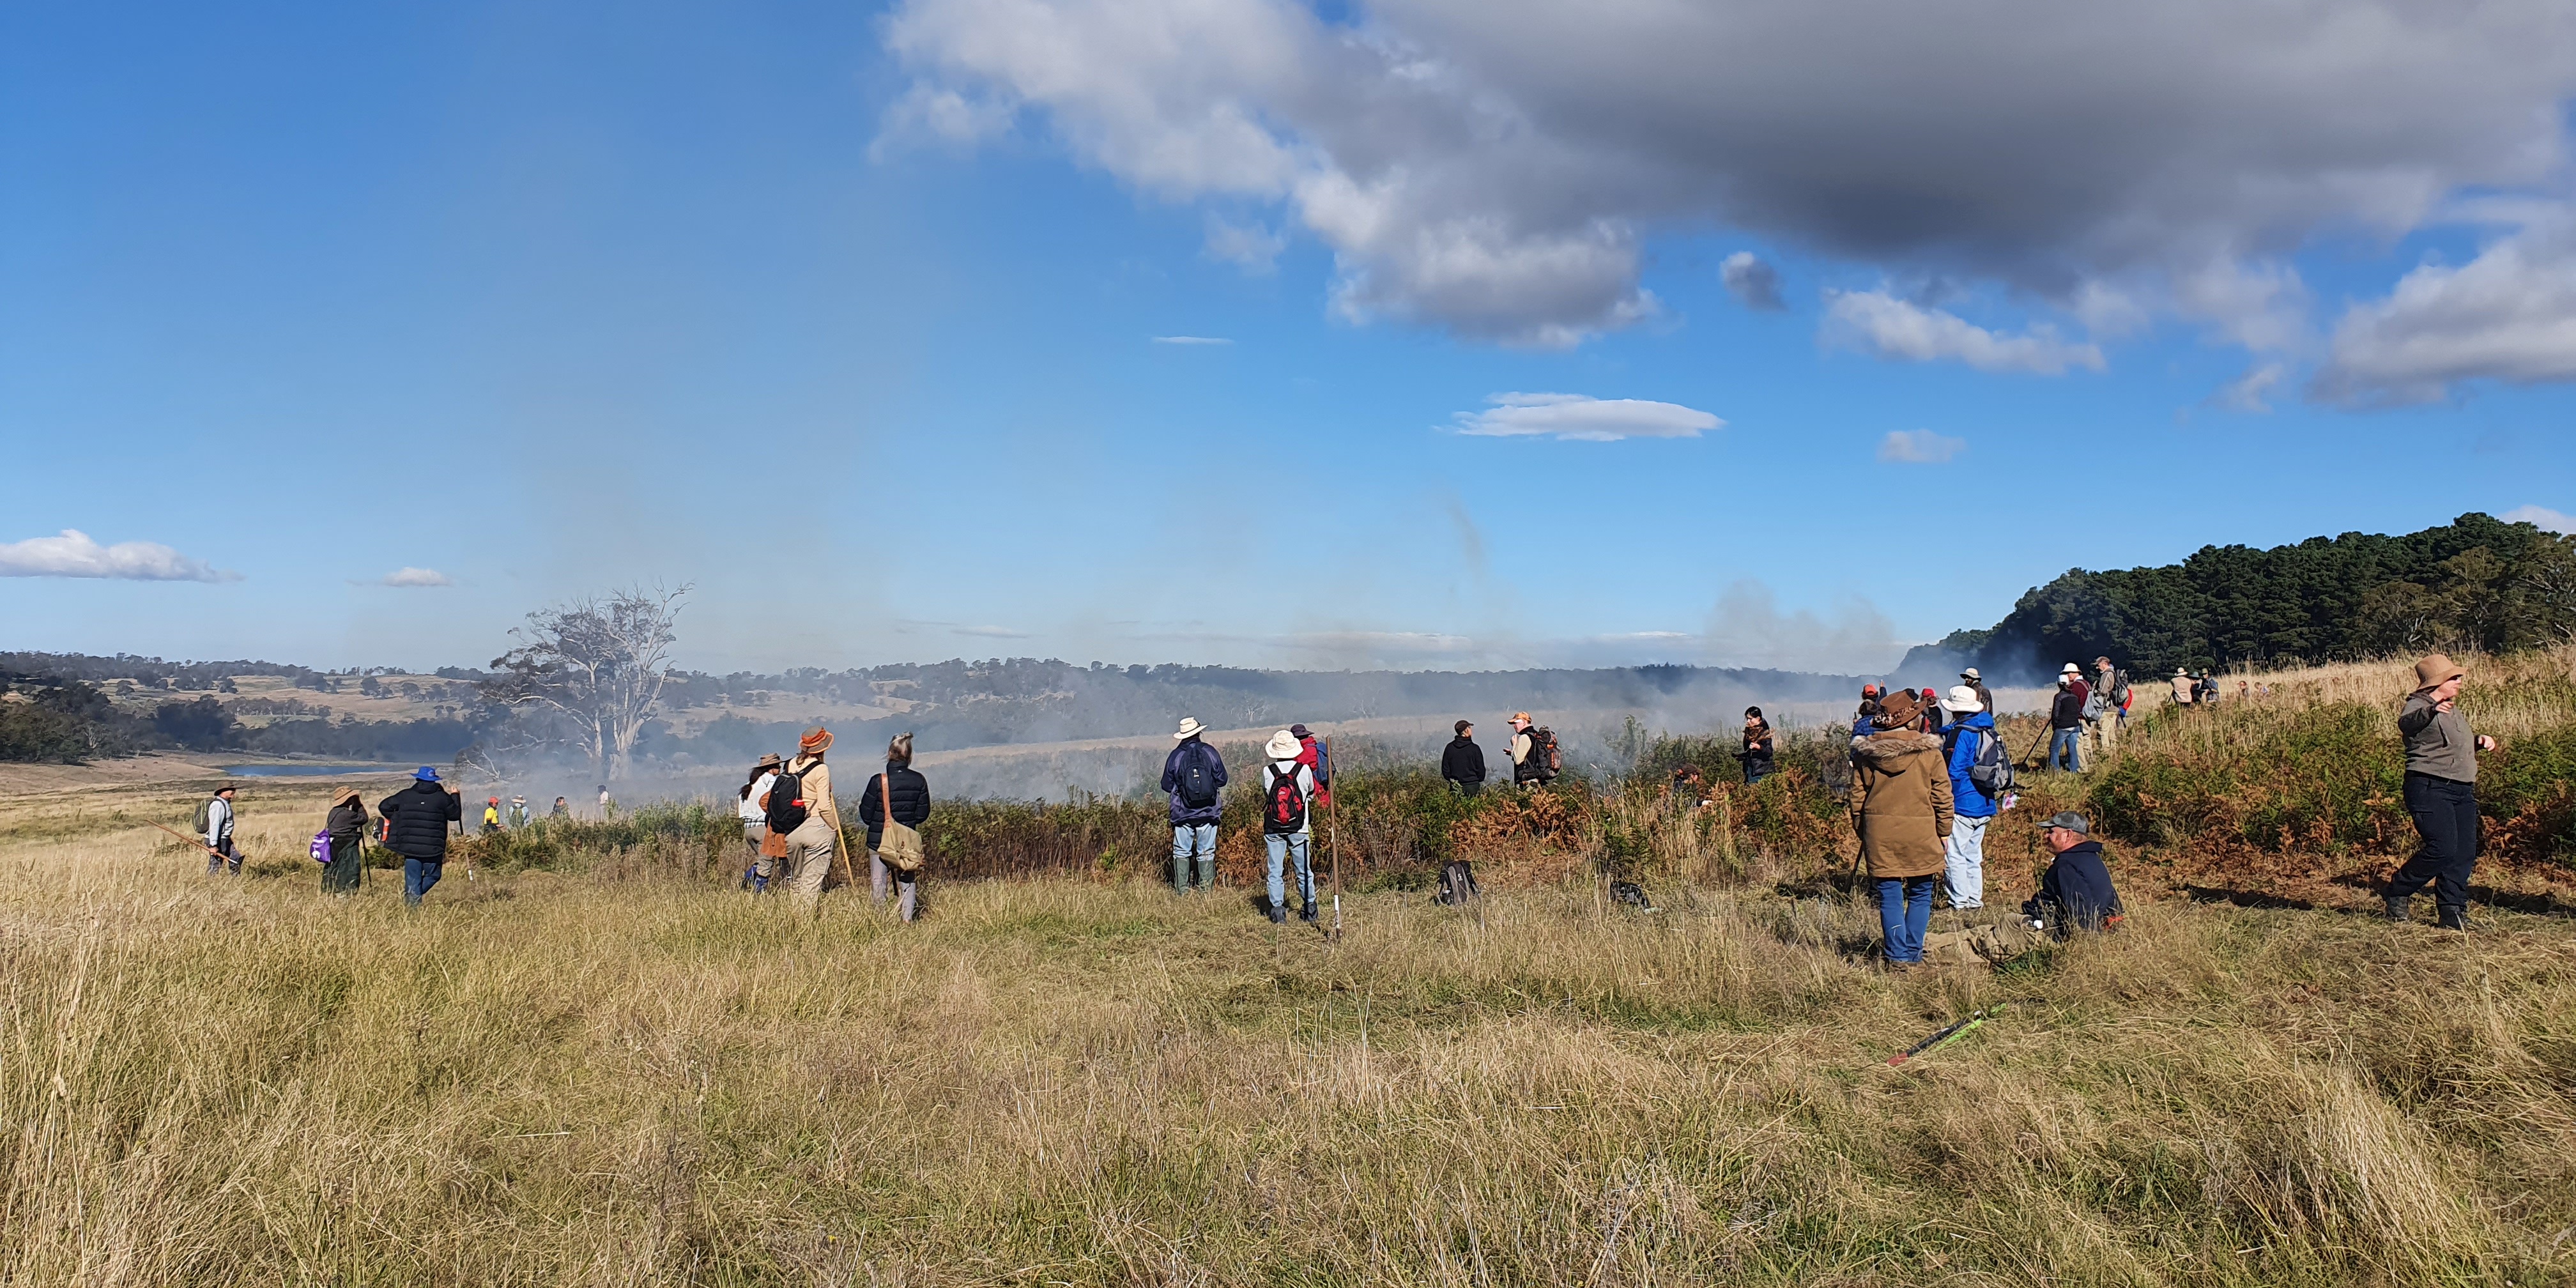 People in a field watching a controlled burn